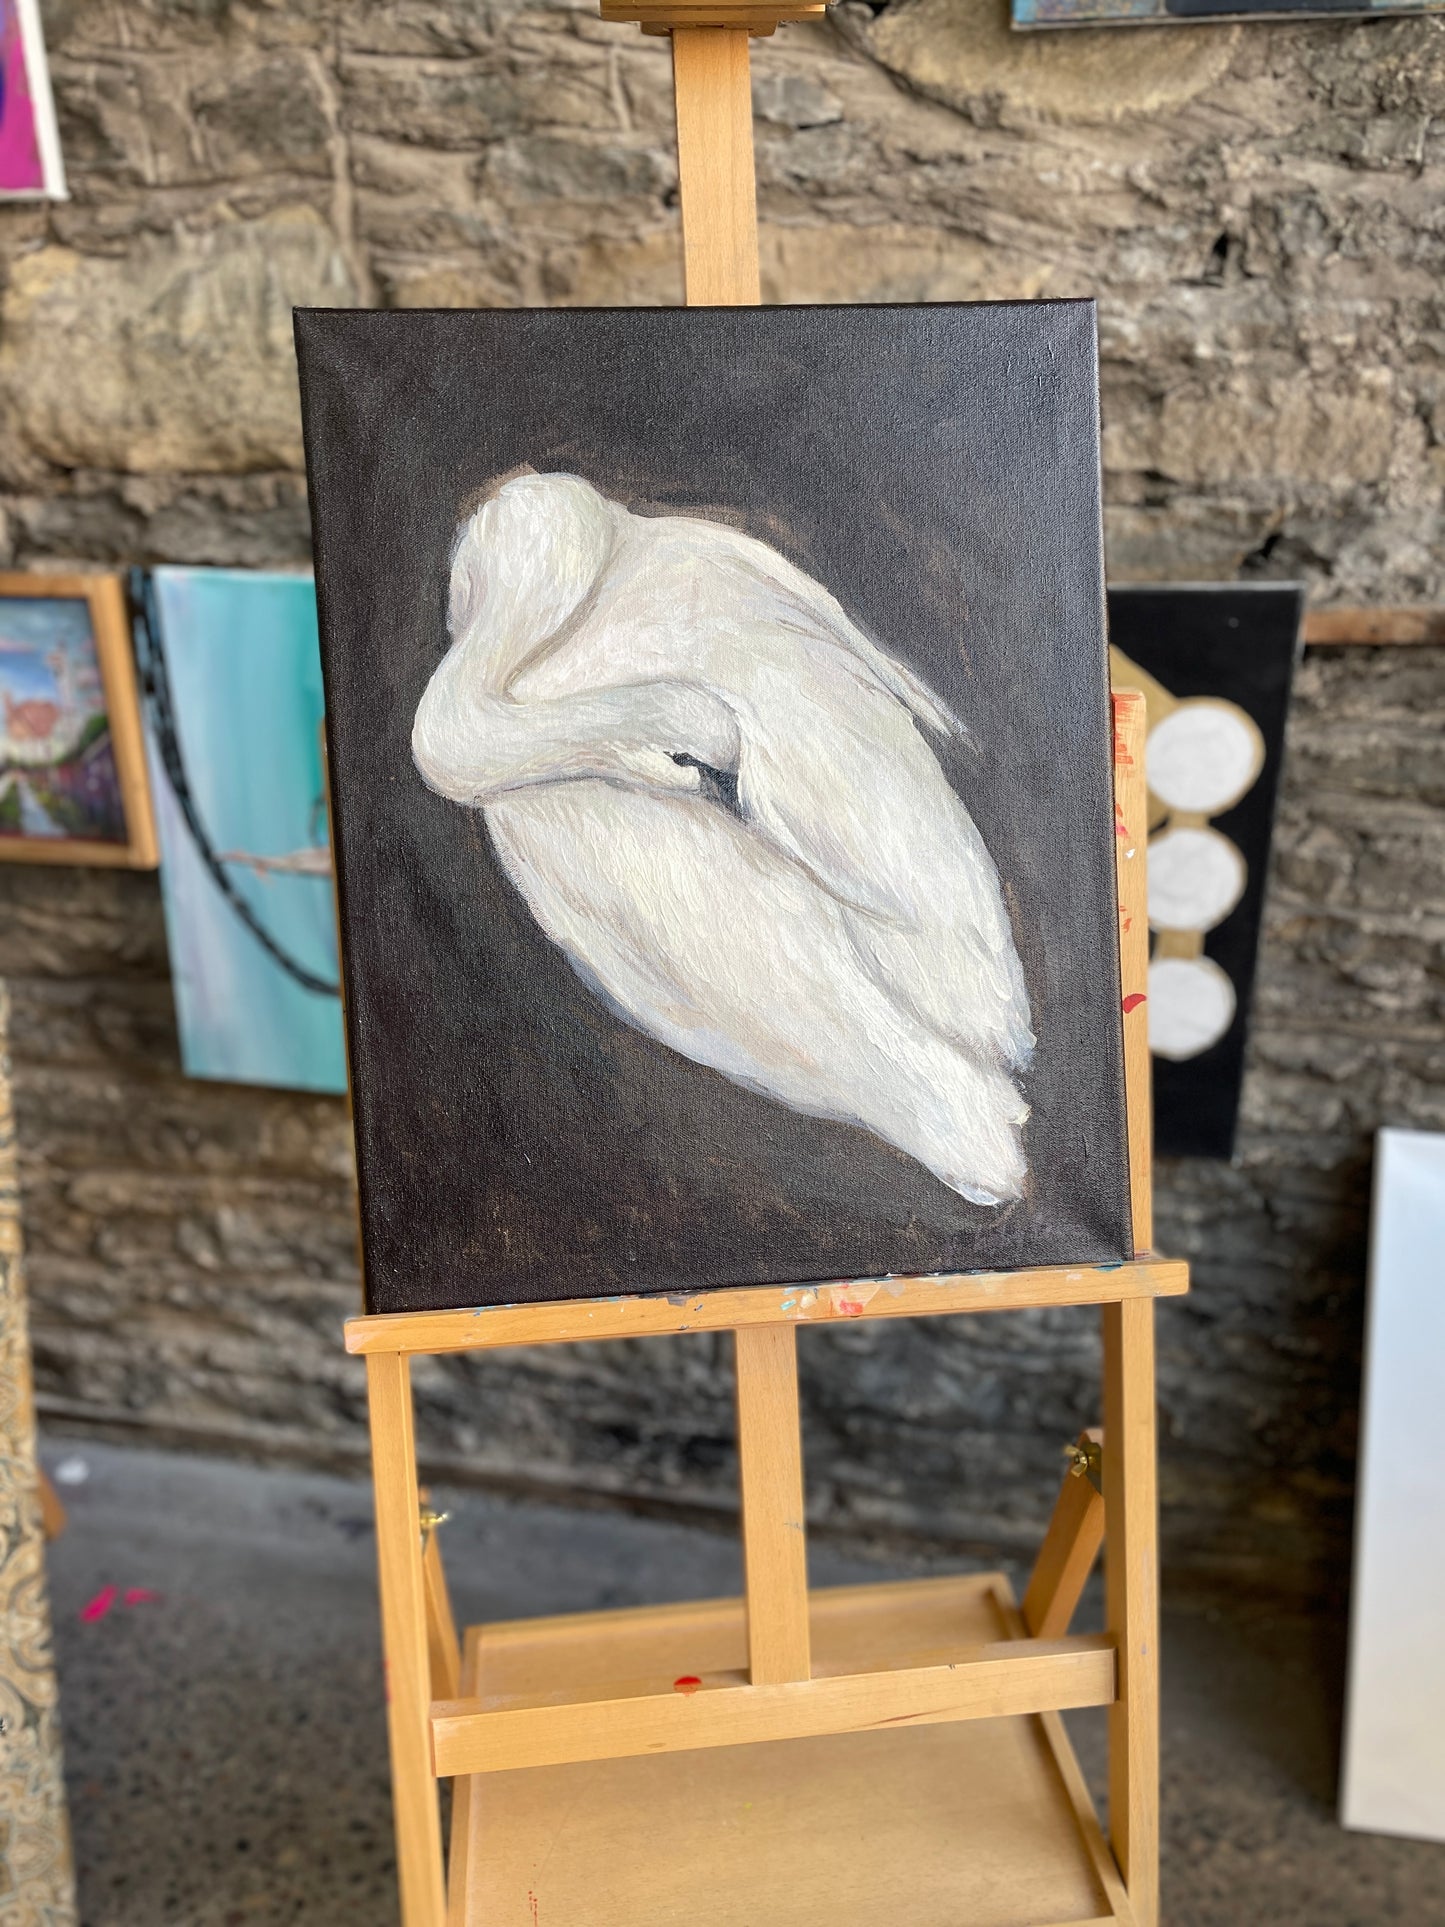 X SOLD "Baby Swan"